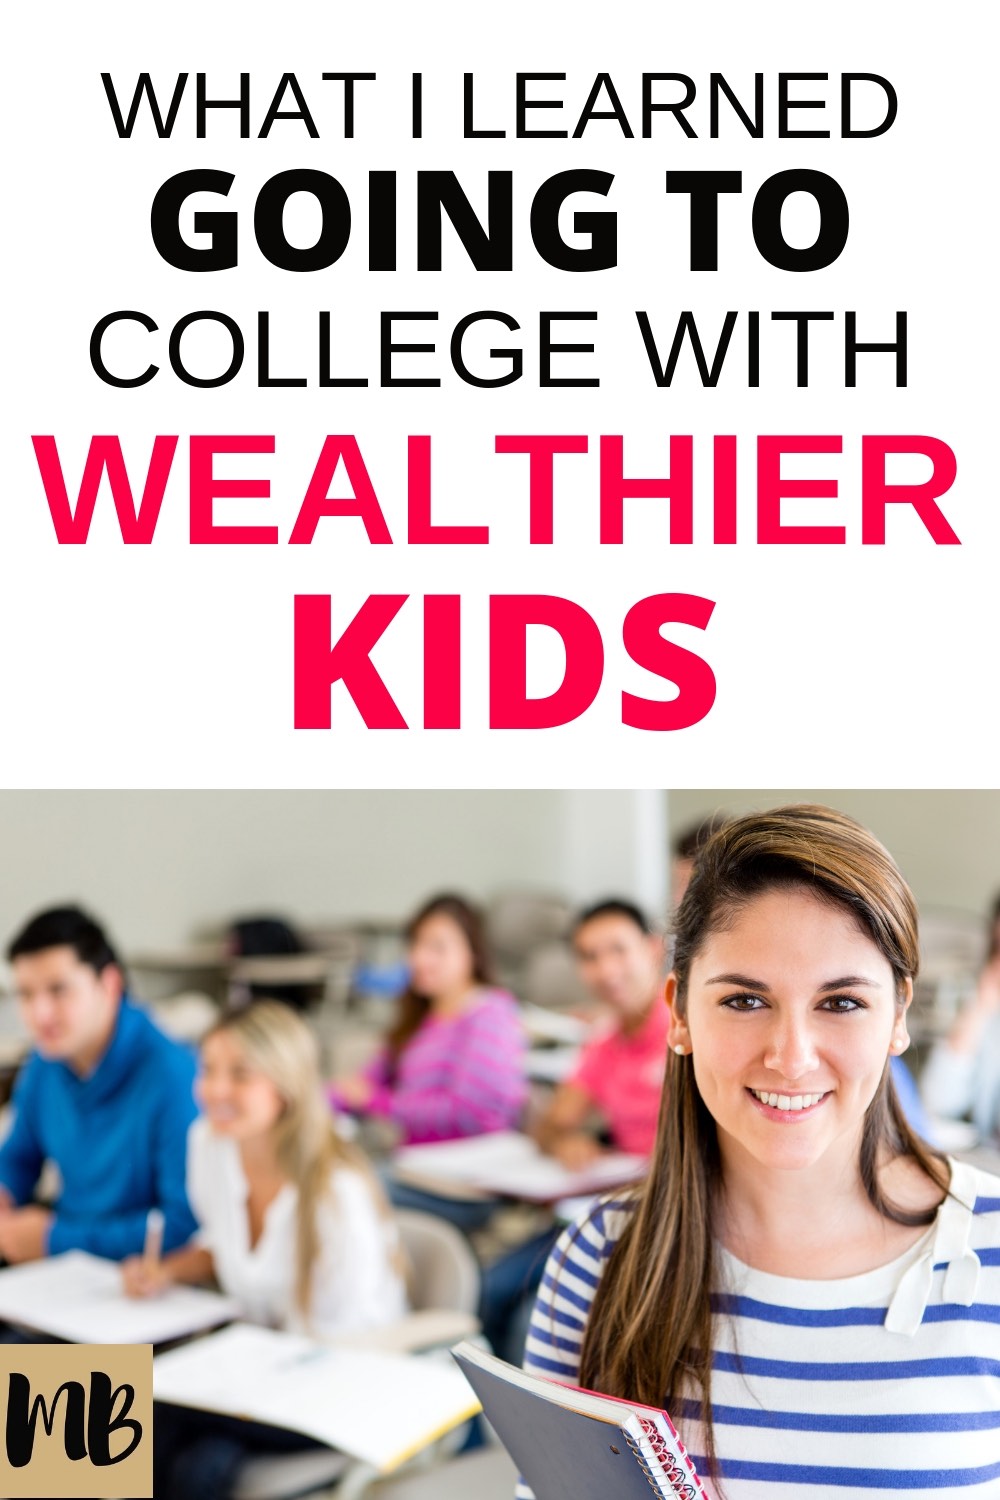 Going to College with Wealthier Kids